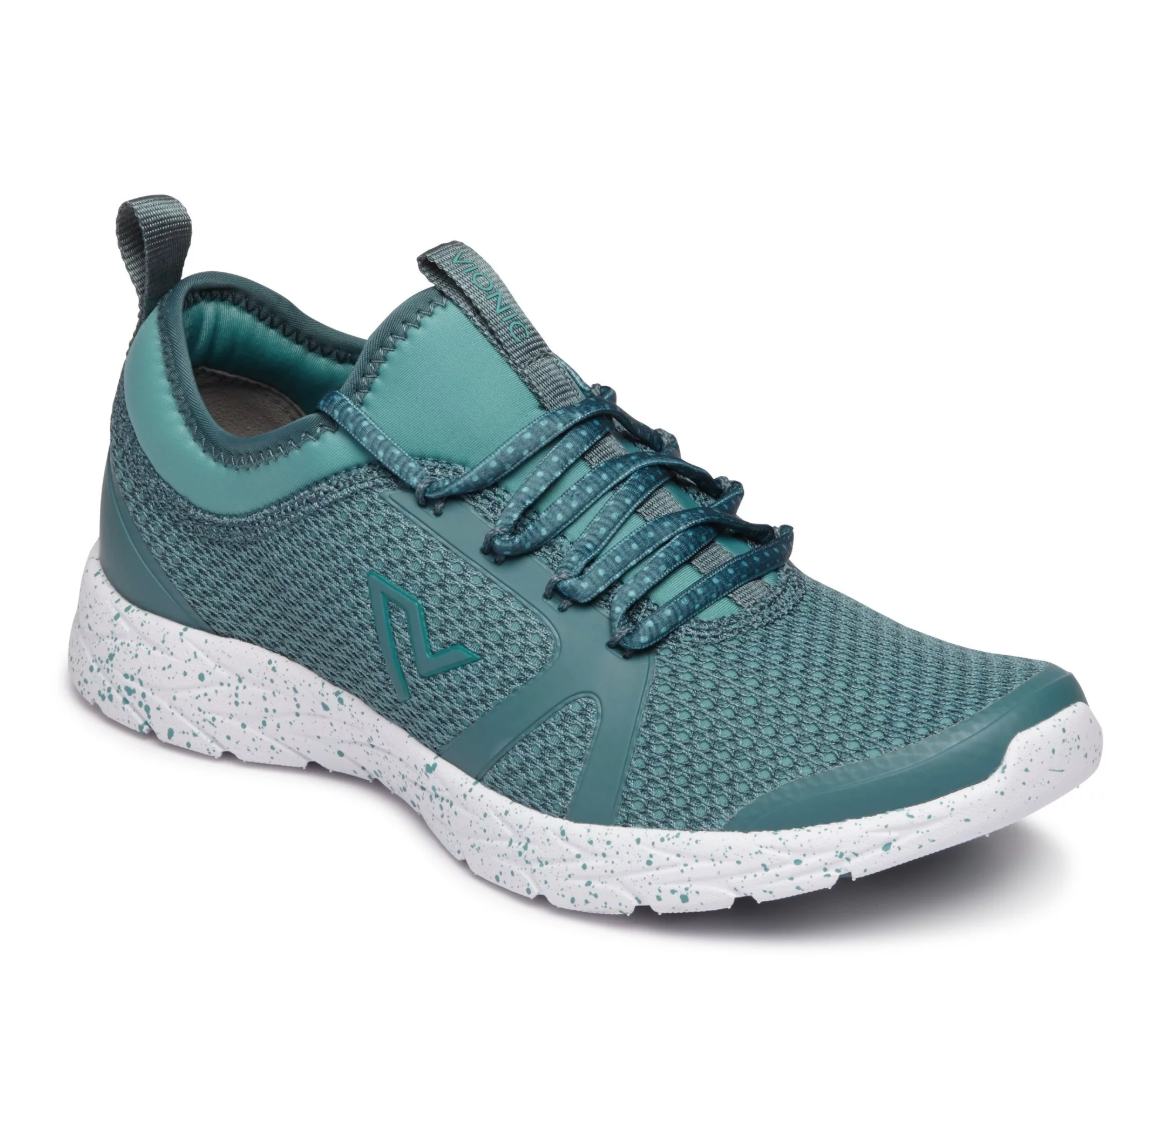 comfortable tennis shoes for women